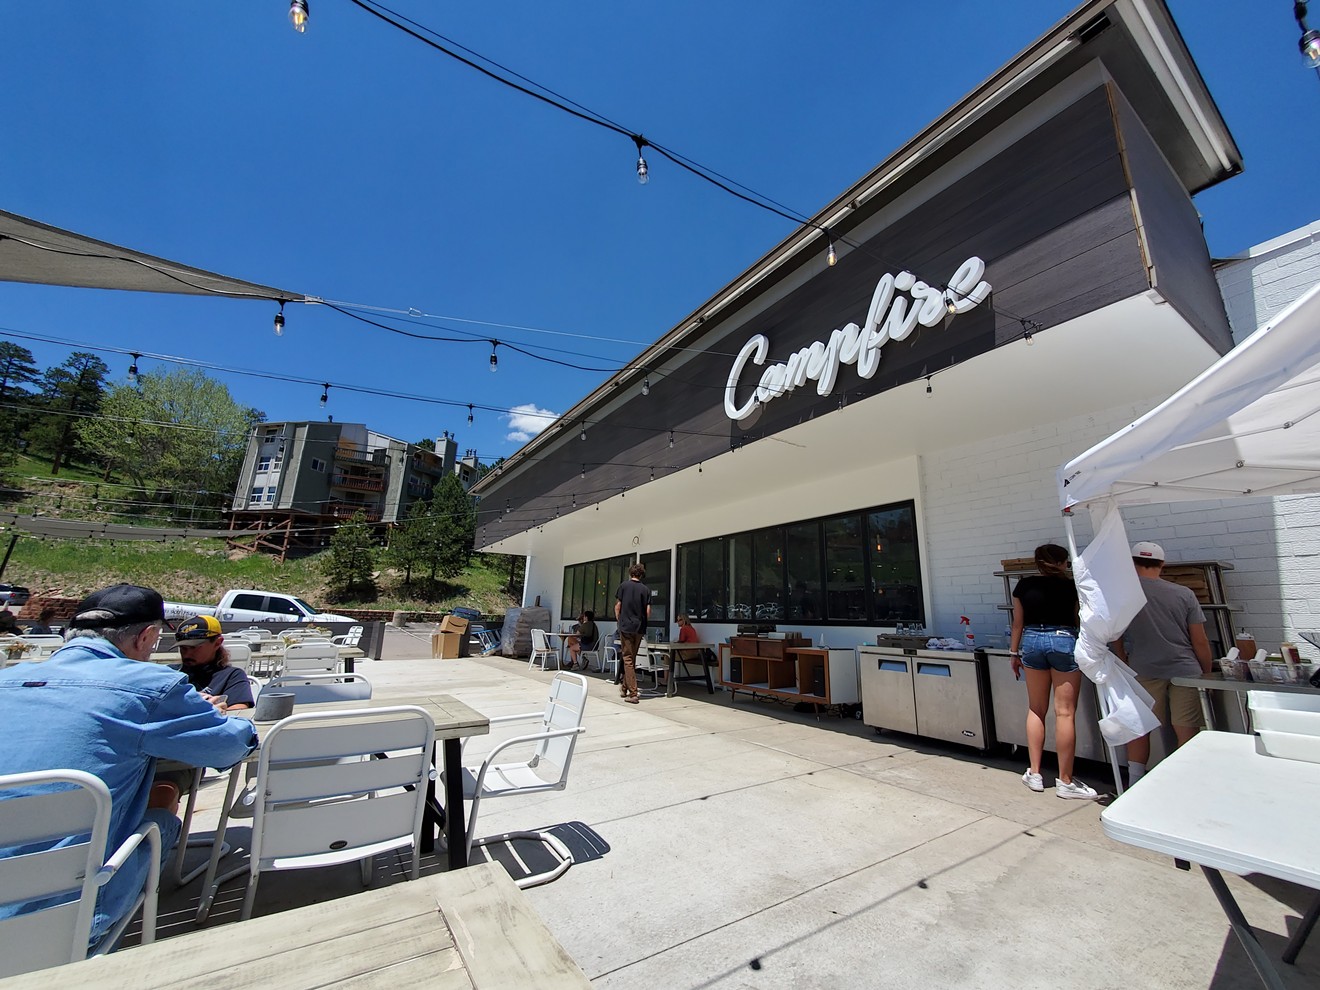 Campfire's first location in Evergreen opened last May.